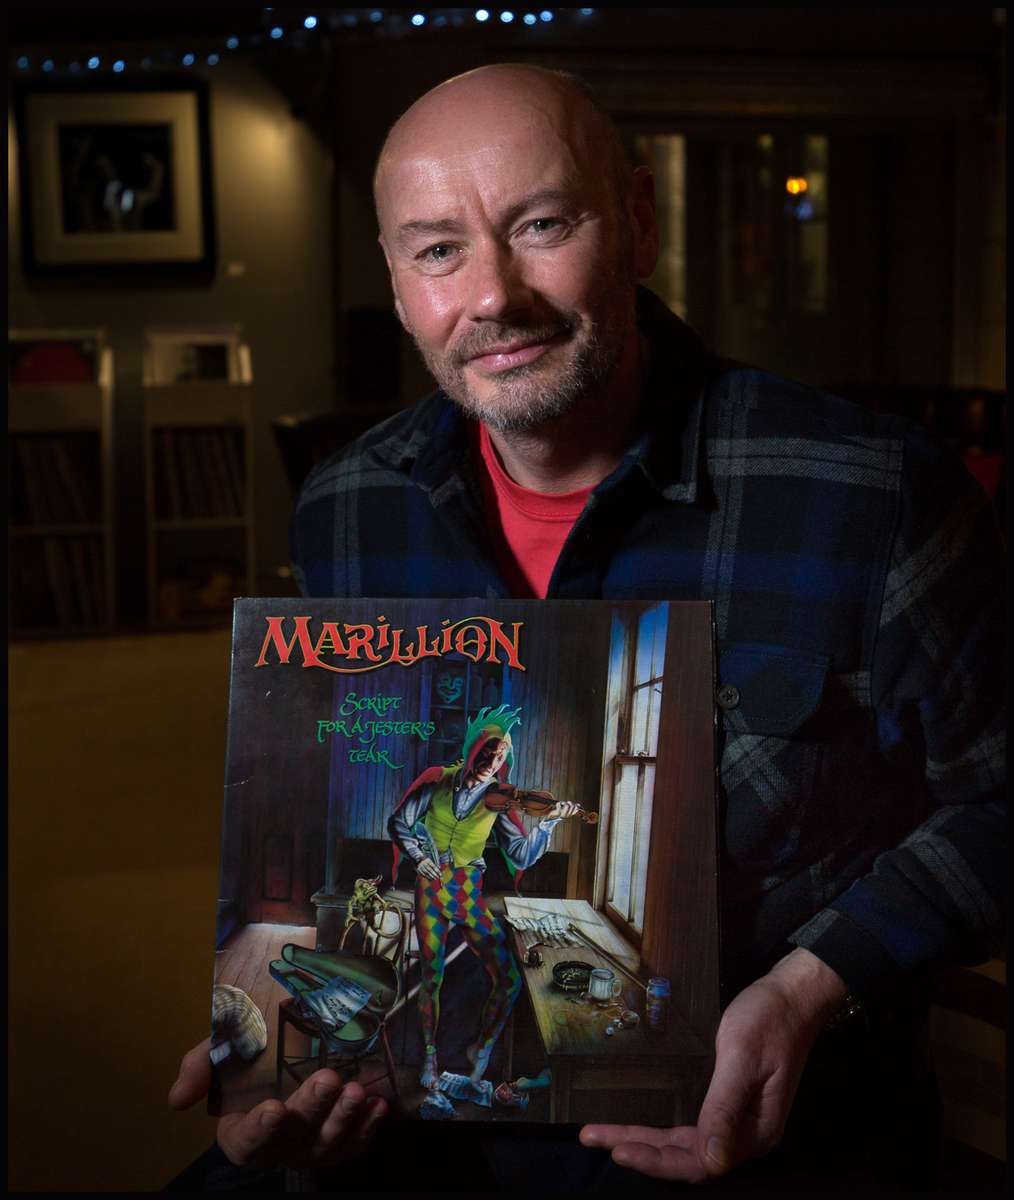 “The album is Script for a Jester’s Tear by Marillion.This is one of the first five albums I bought. The first was Pictures of Matchstick Men by Status Quo.Intersting album but it didn’t take me to the places that Script for a Jester’s Tear has.This album came out in 1983 and I’ve made so many lifetime friends through Marilliion.I’m not a Marillion geek I just happen to have other friends who have the same passsion We’ve been to so many Marillion gigs and Fish conventions in different parts of the world and it’s just one of those albums that catalyses us all together. It’s all about friendship and it’s all about people and catalysing I remember buying it in John Menzies on Annan High Street for £5.99 - which was quite alot of money in those days.As I say it’s catalysing people.”One LP Session: Dave CameronSession date: 2nd December 2021Location: Loud & Clear, EdinburghArtist/ensemble: MarillionRecording Title: Script for a Jester’s TearReleased: 13th March 1983Recorded: December 1982 – February 1983Studio: Connecticut Recording StudioLength: 46.45Label: EMIProducer: Nick Tauber